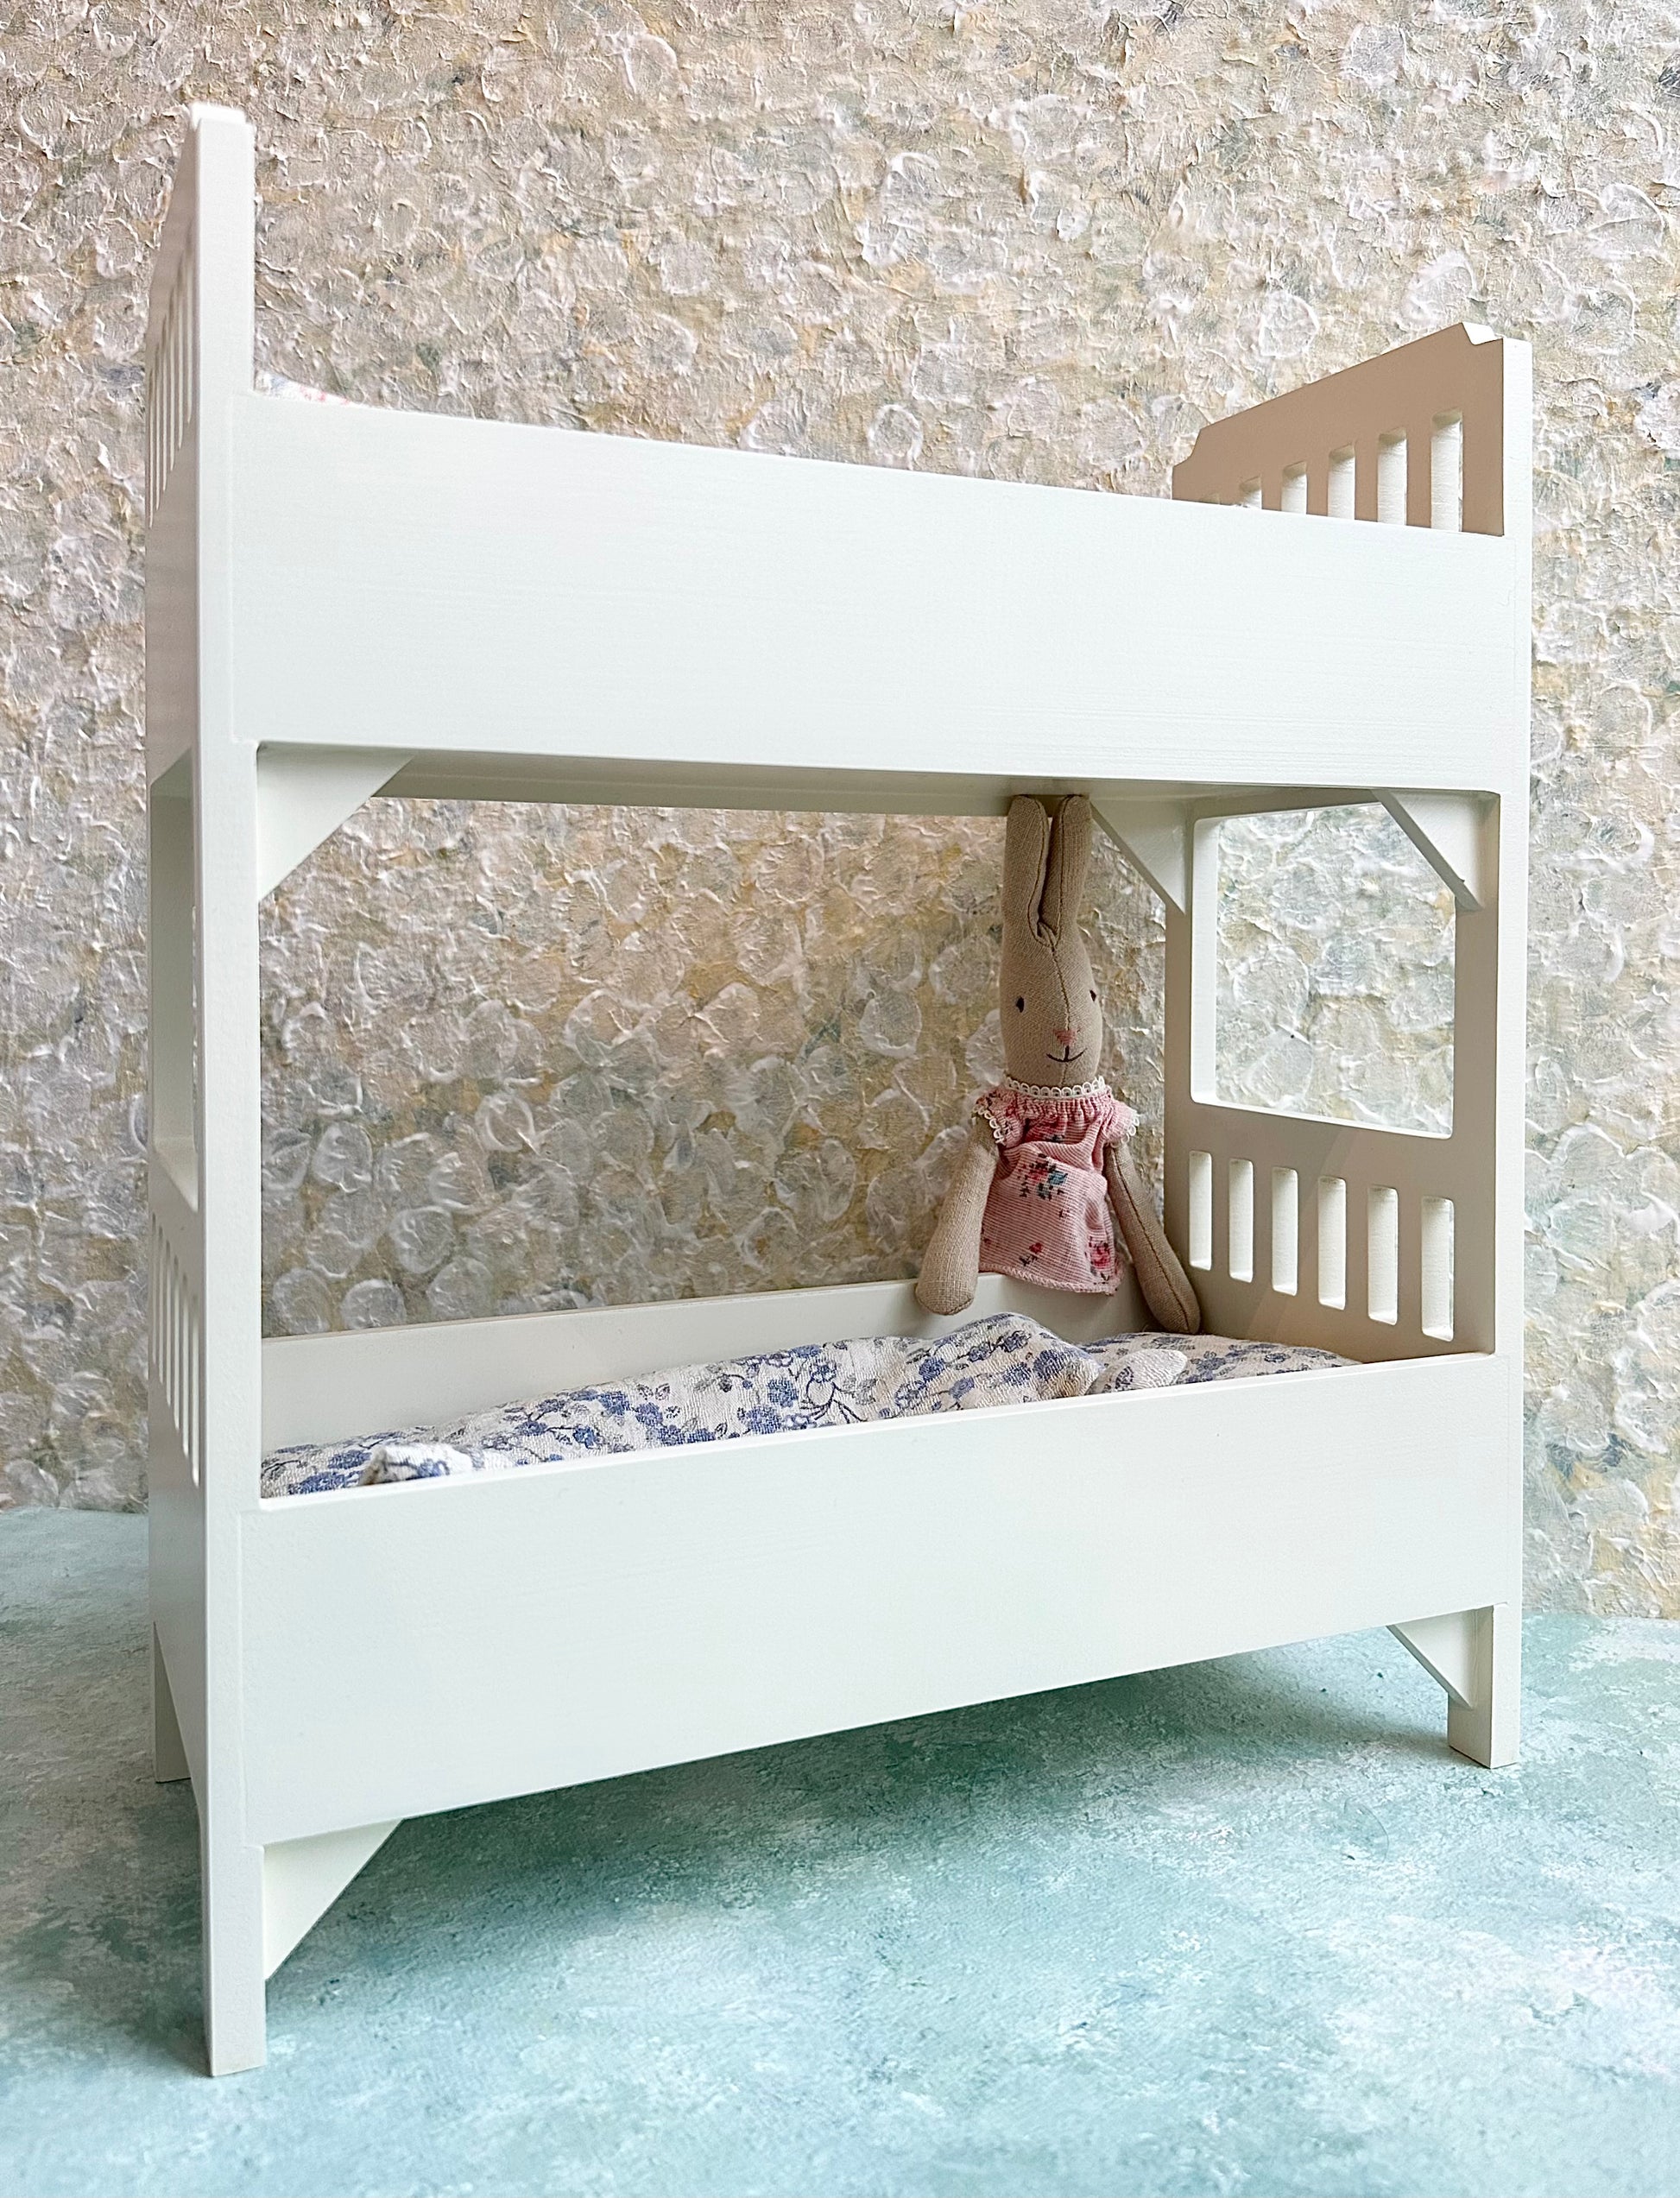 Small Wooden Bunk Bed - 2016